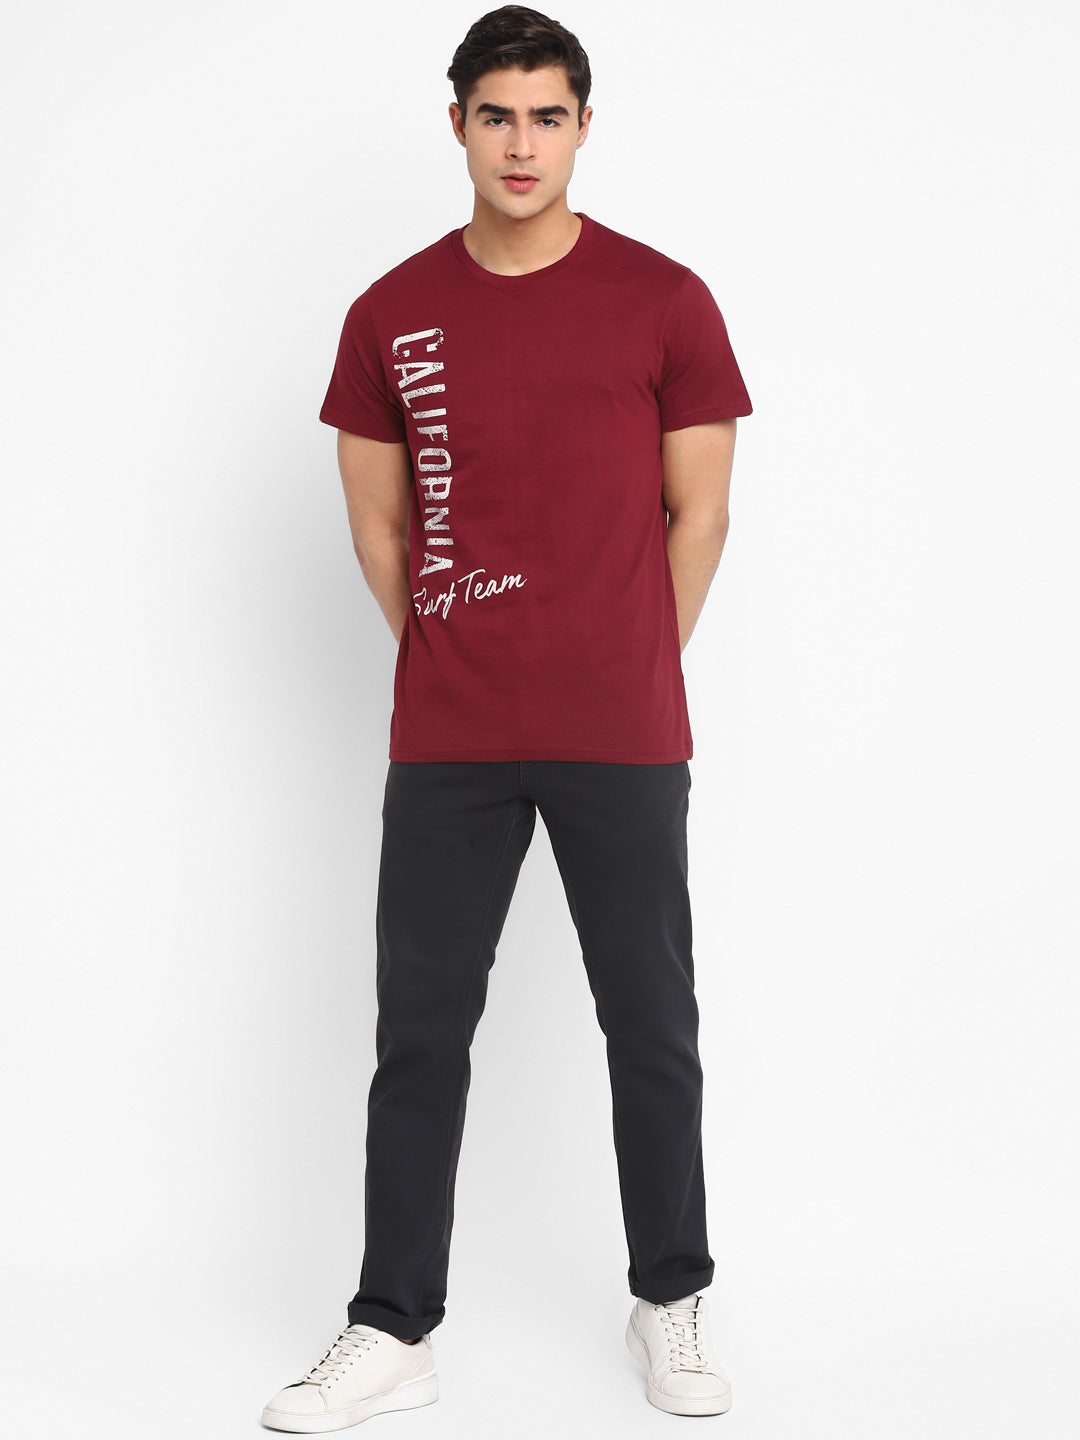 100% Cotton Printed Round Neck T-Shirt For Men - Maroon